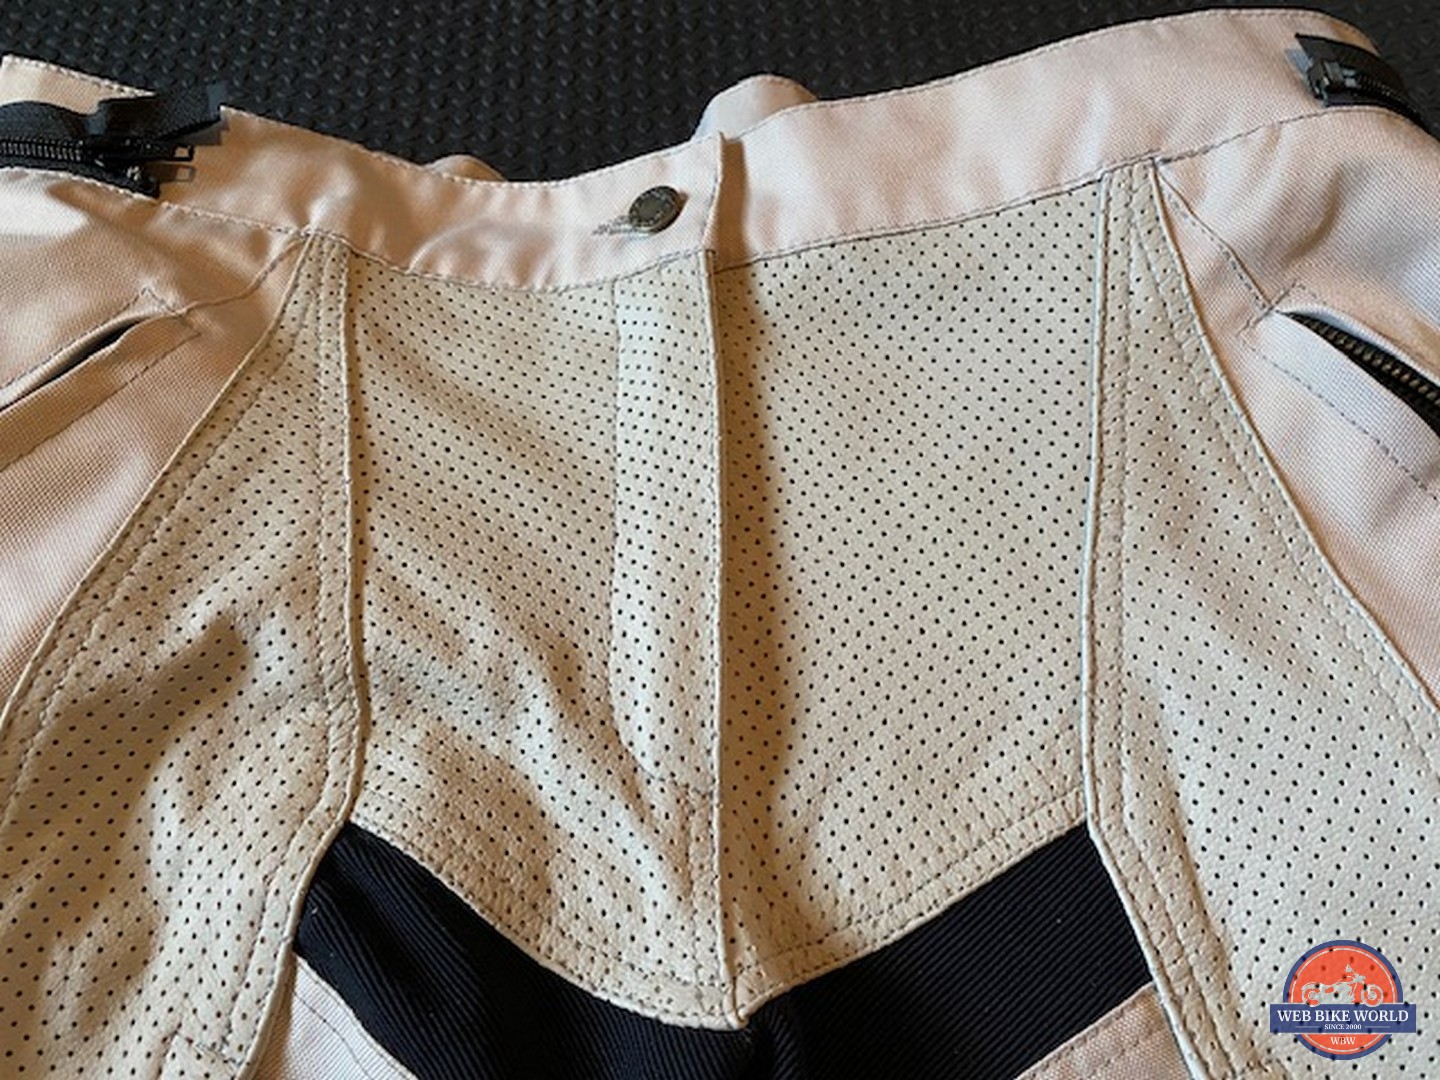 Closeup of perforated leather on the Falcon pants